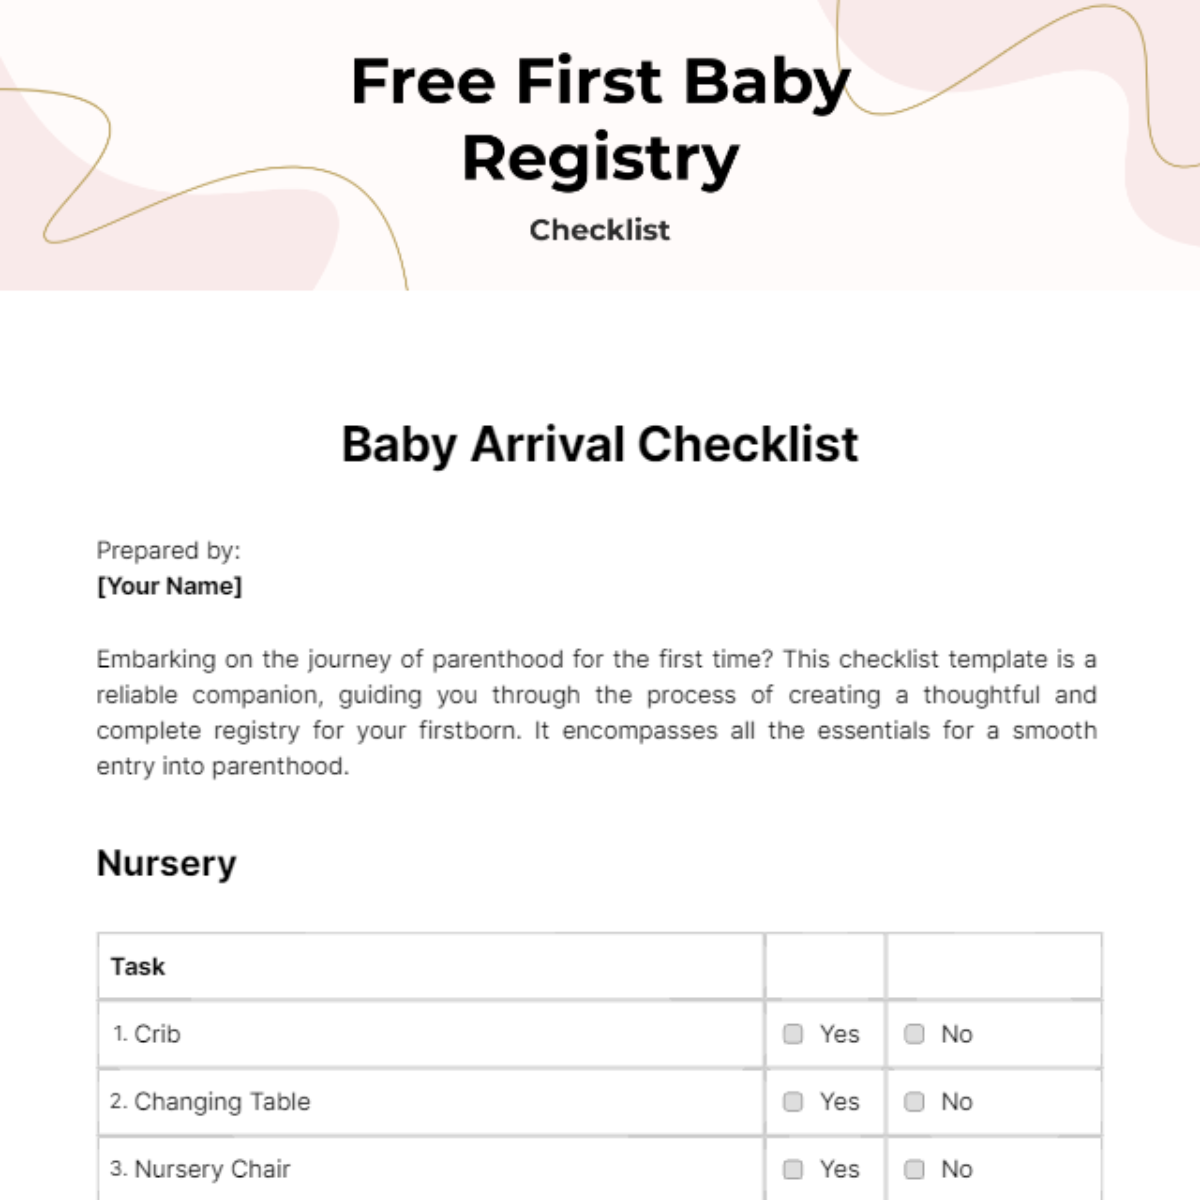 Free First Baby Registry Checklist Template